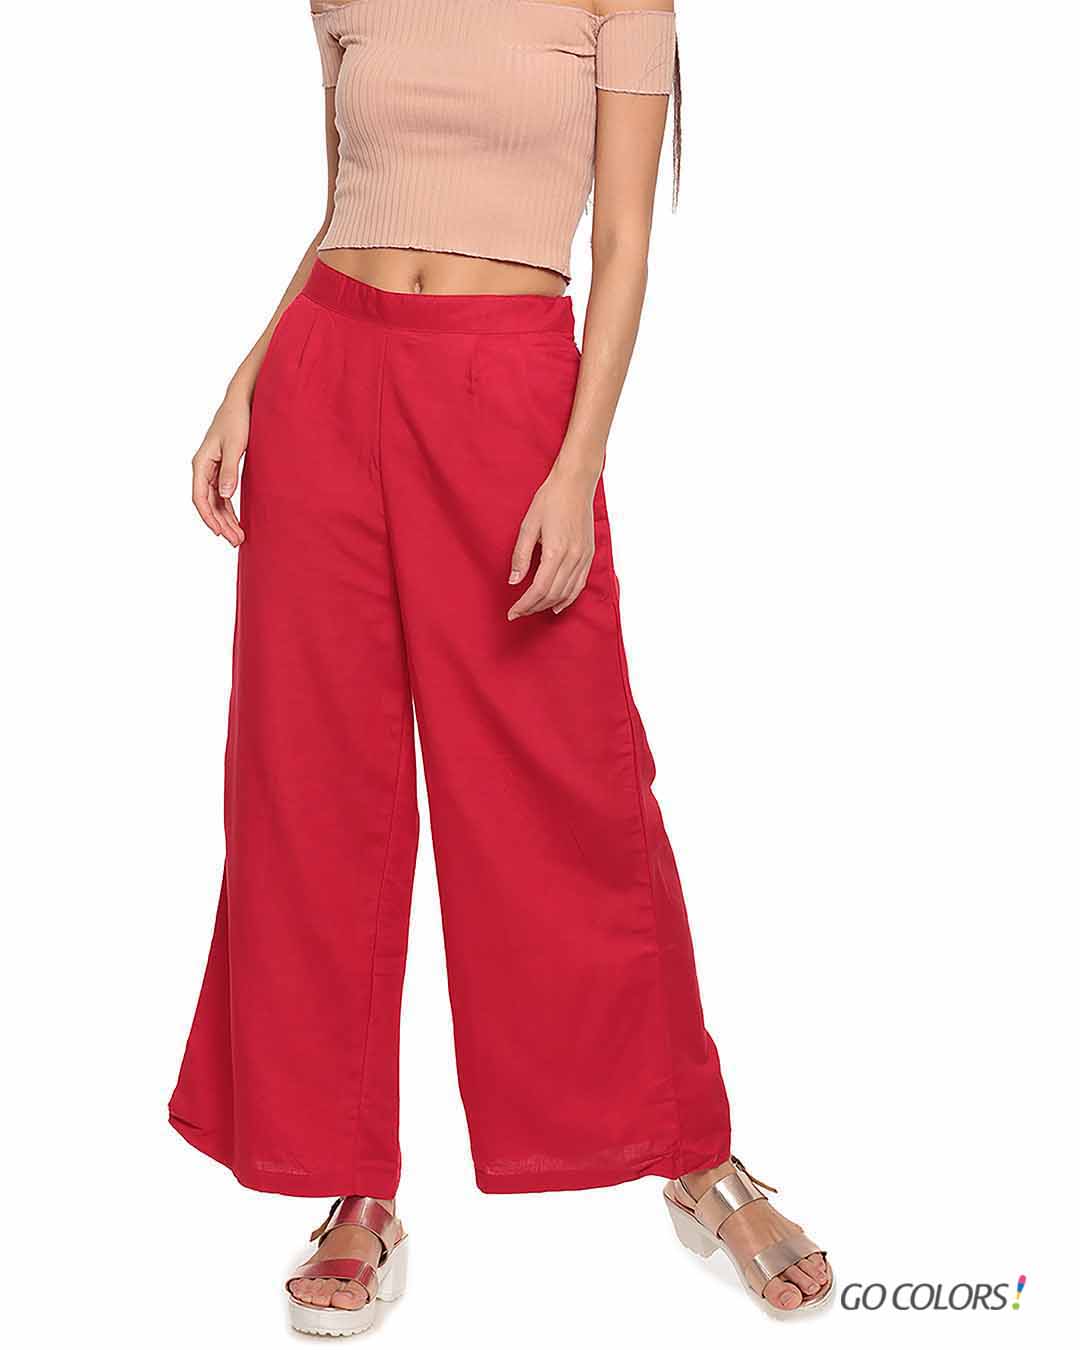 Buy GO COLORS Womens Solid Shiny Pants | Shoppers Stop